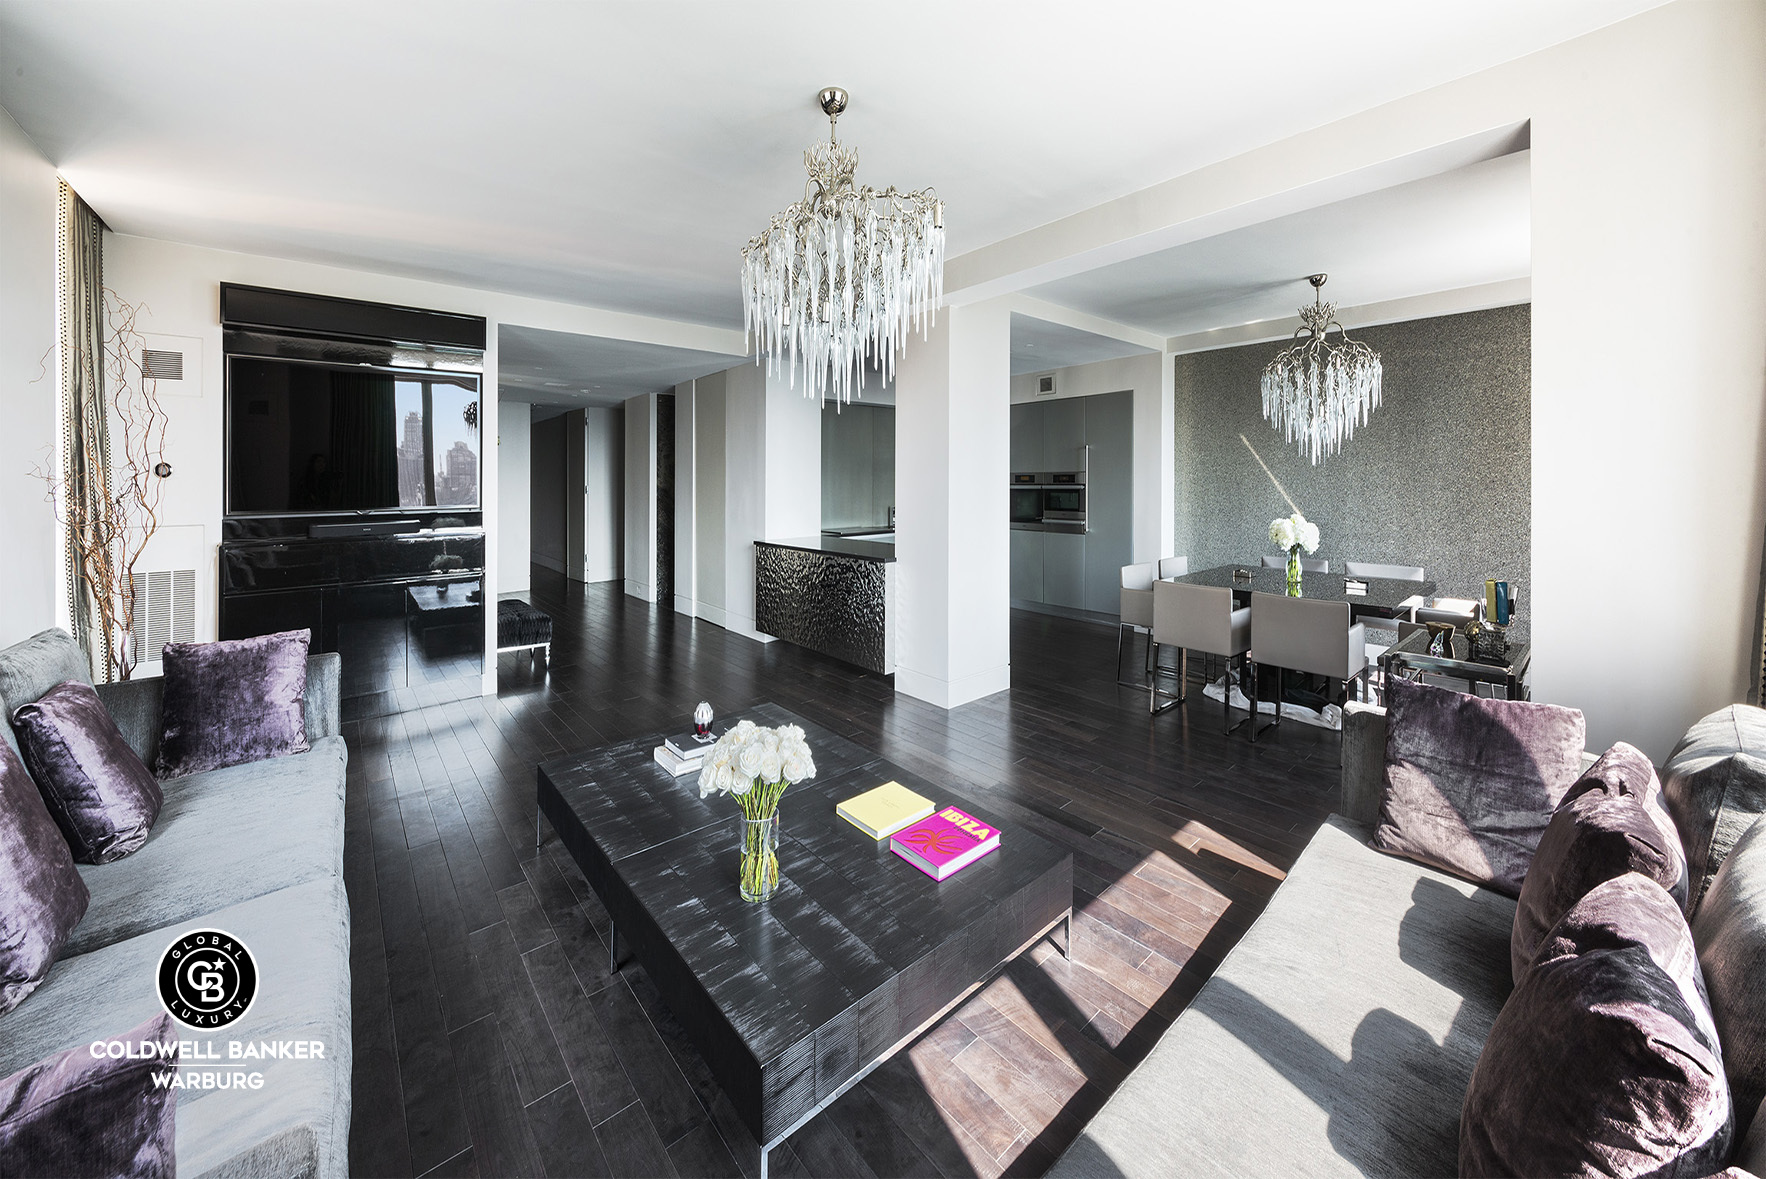 15 West 63rd Street 23B, Lincoln Square, Upper West Side, NYC - 4 Bedrooms  
4.5 Bathrooms  
7 Rooms - 